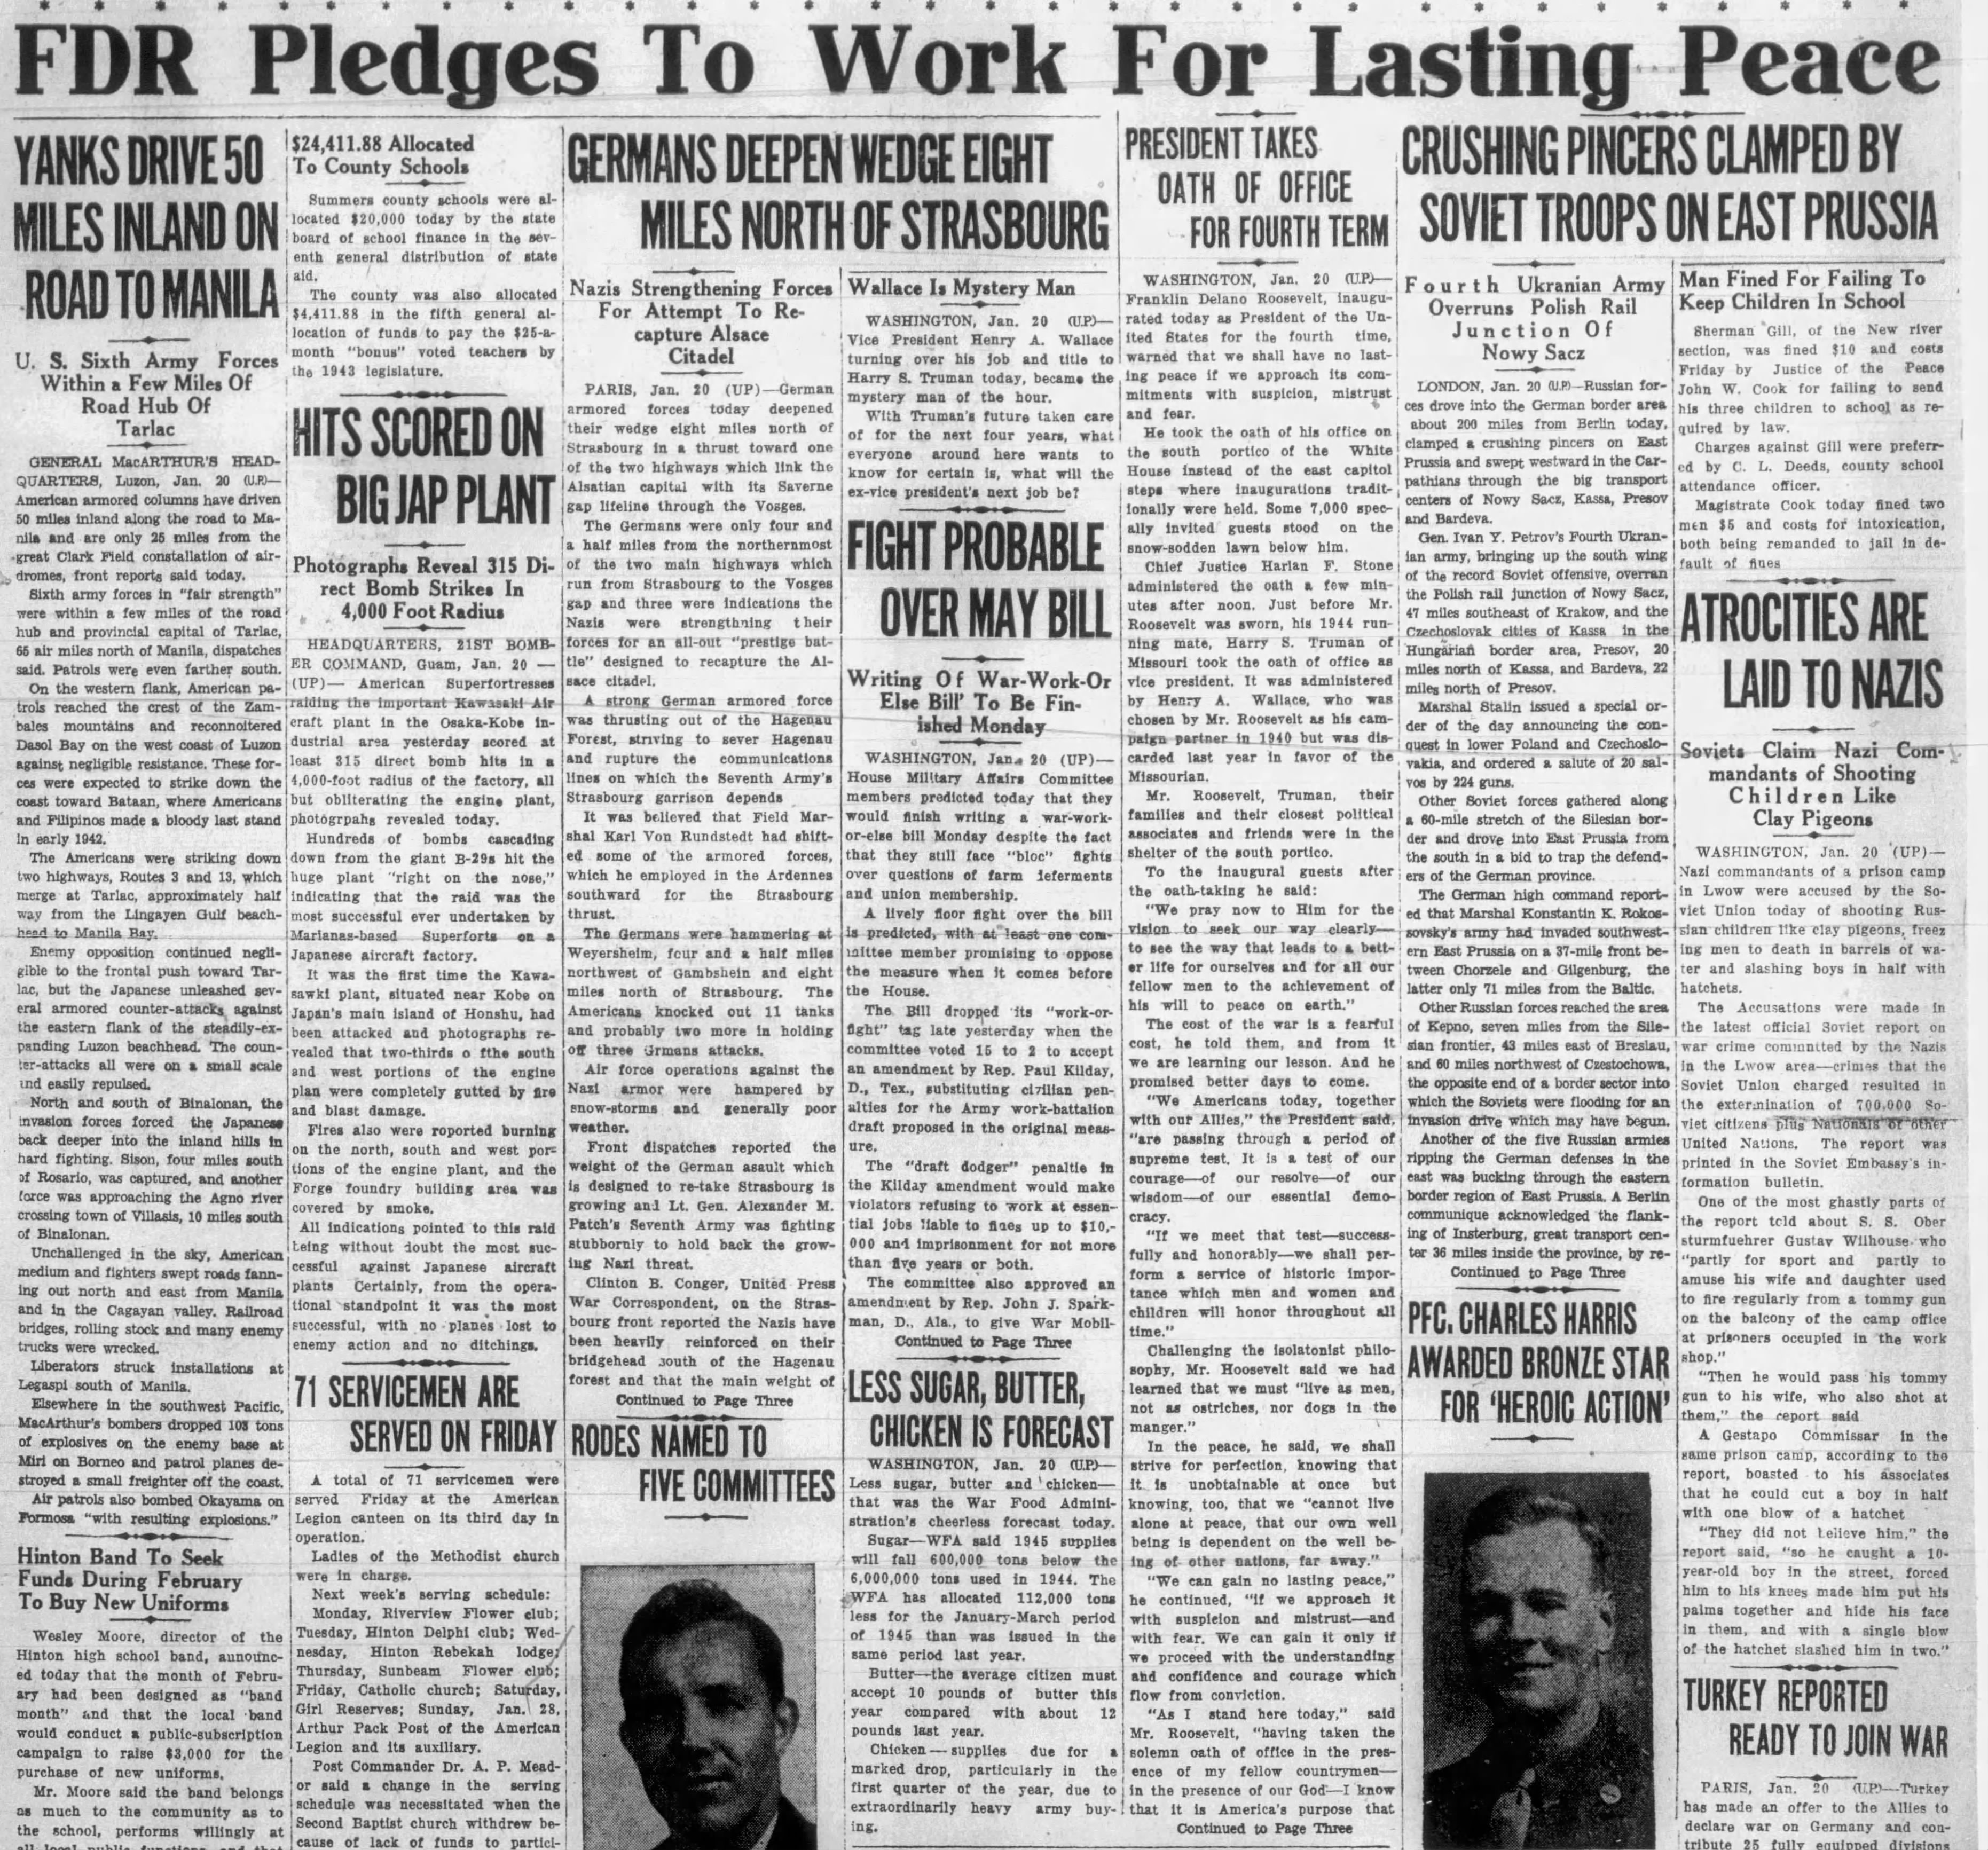 FDR Pledges To Work For Lasting Peace